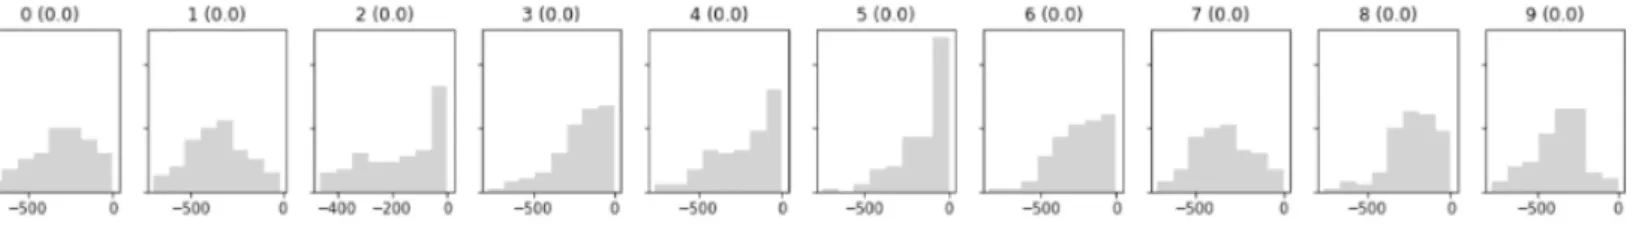 Figure 13: Skipped prediction on randomly generated data because of too low probability.